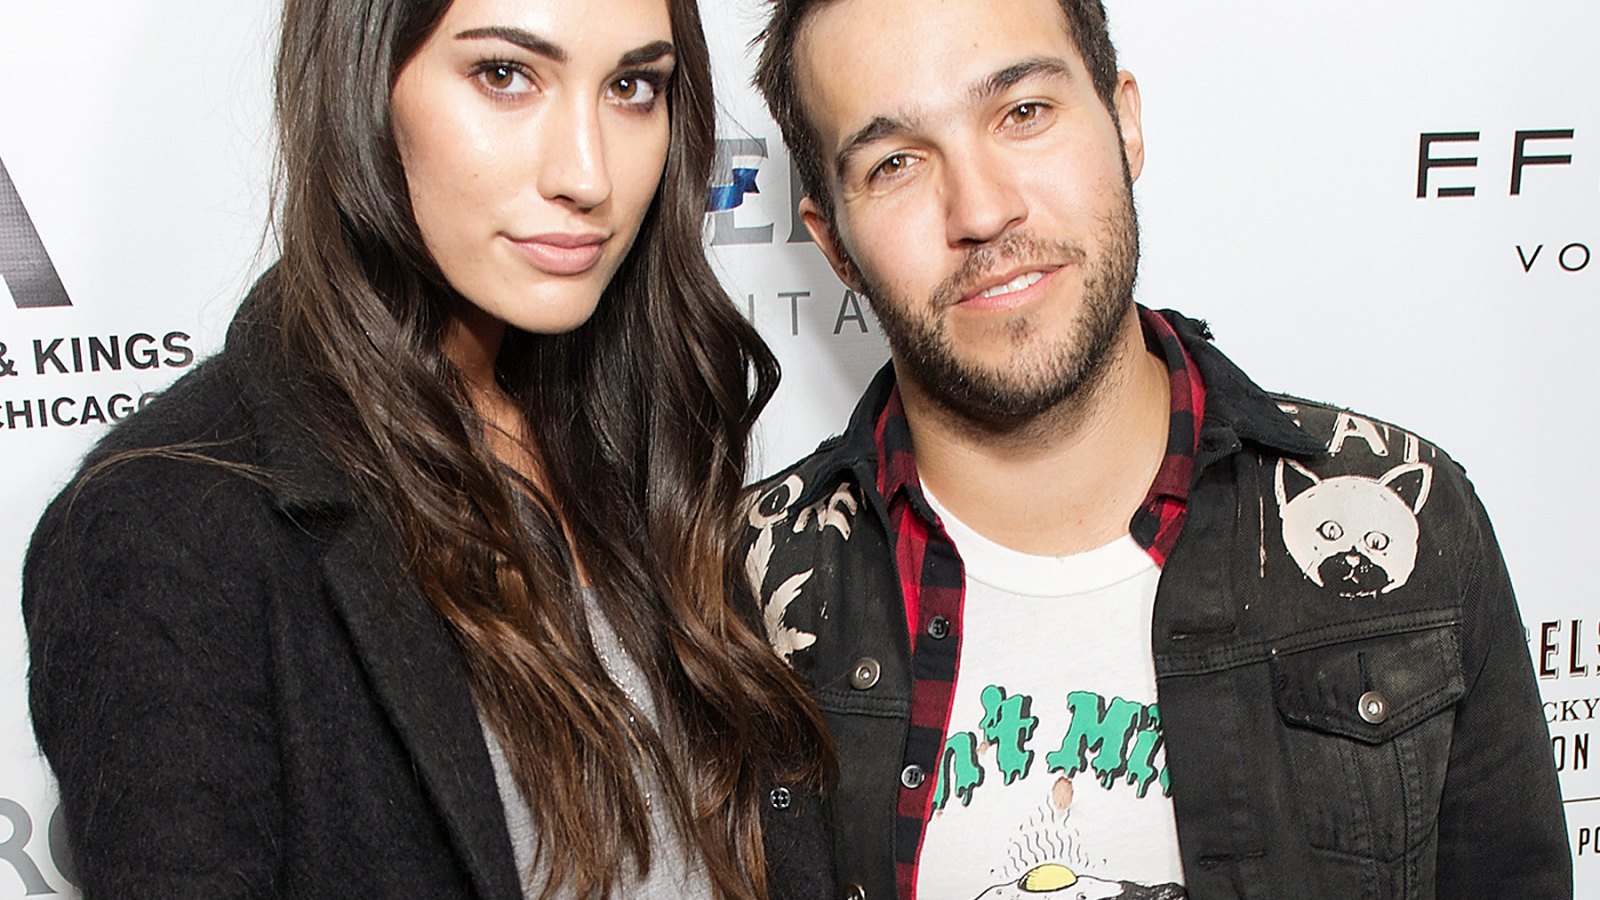 Meagan Camper and Pete Wentz attend an event on February 2, 2013